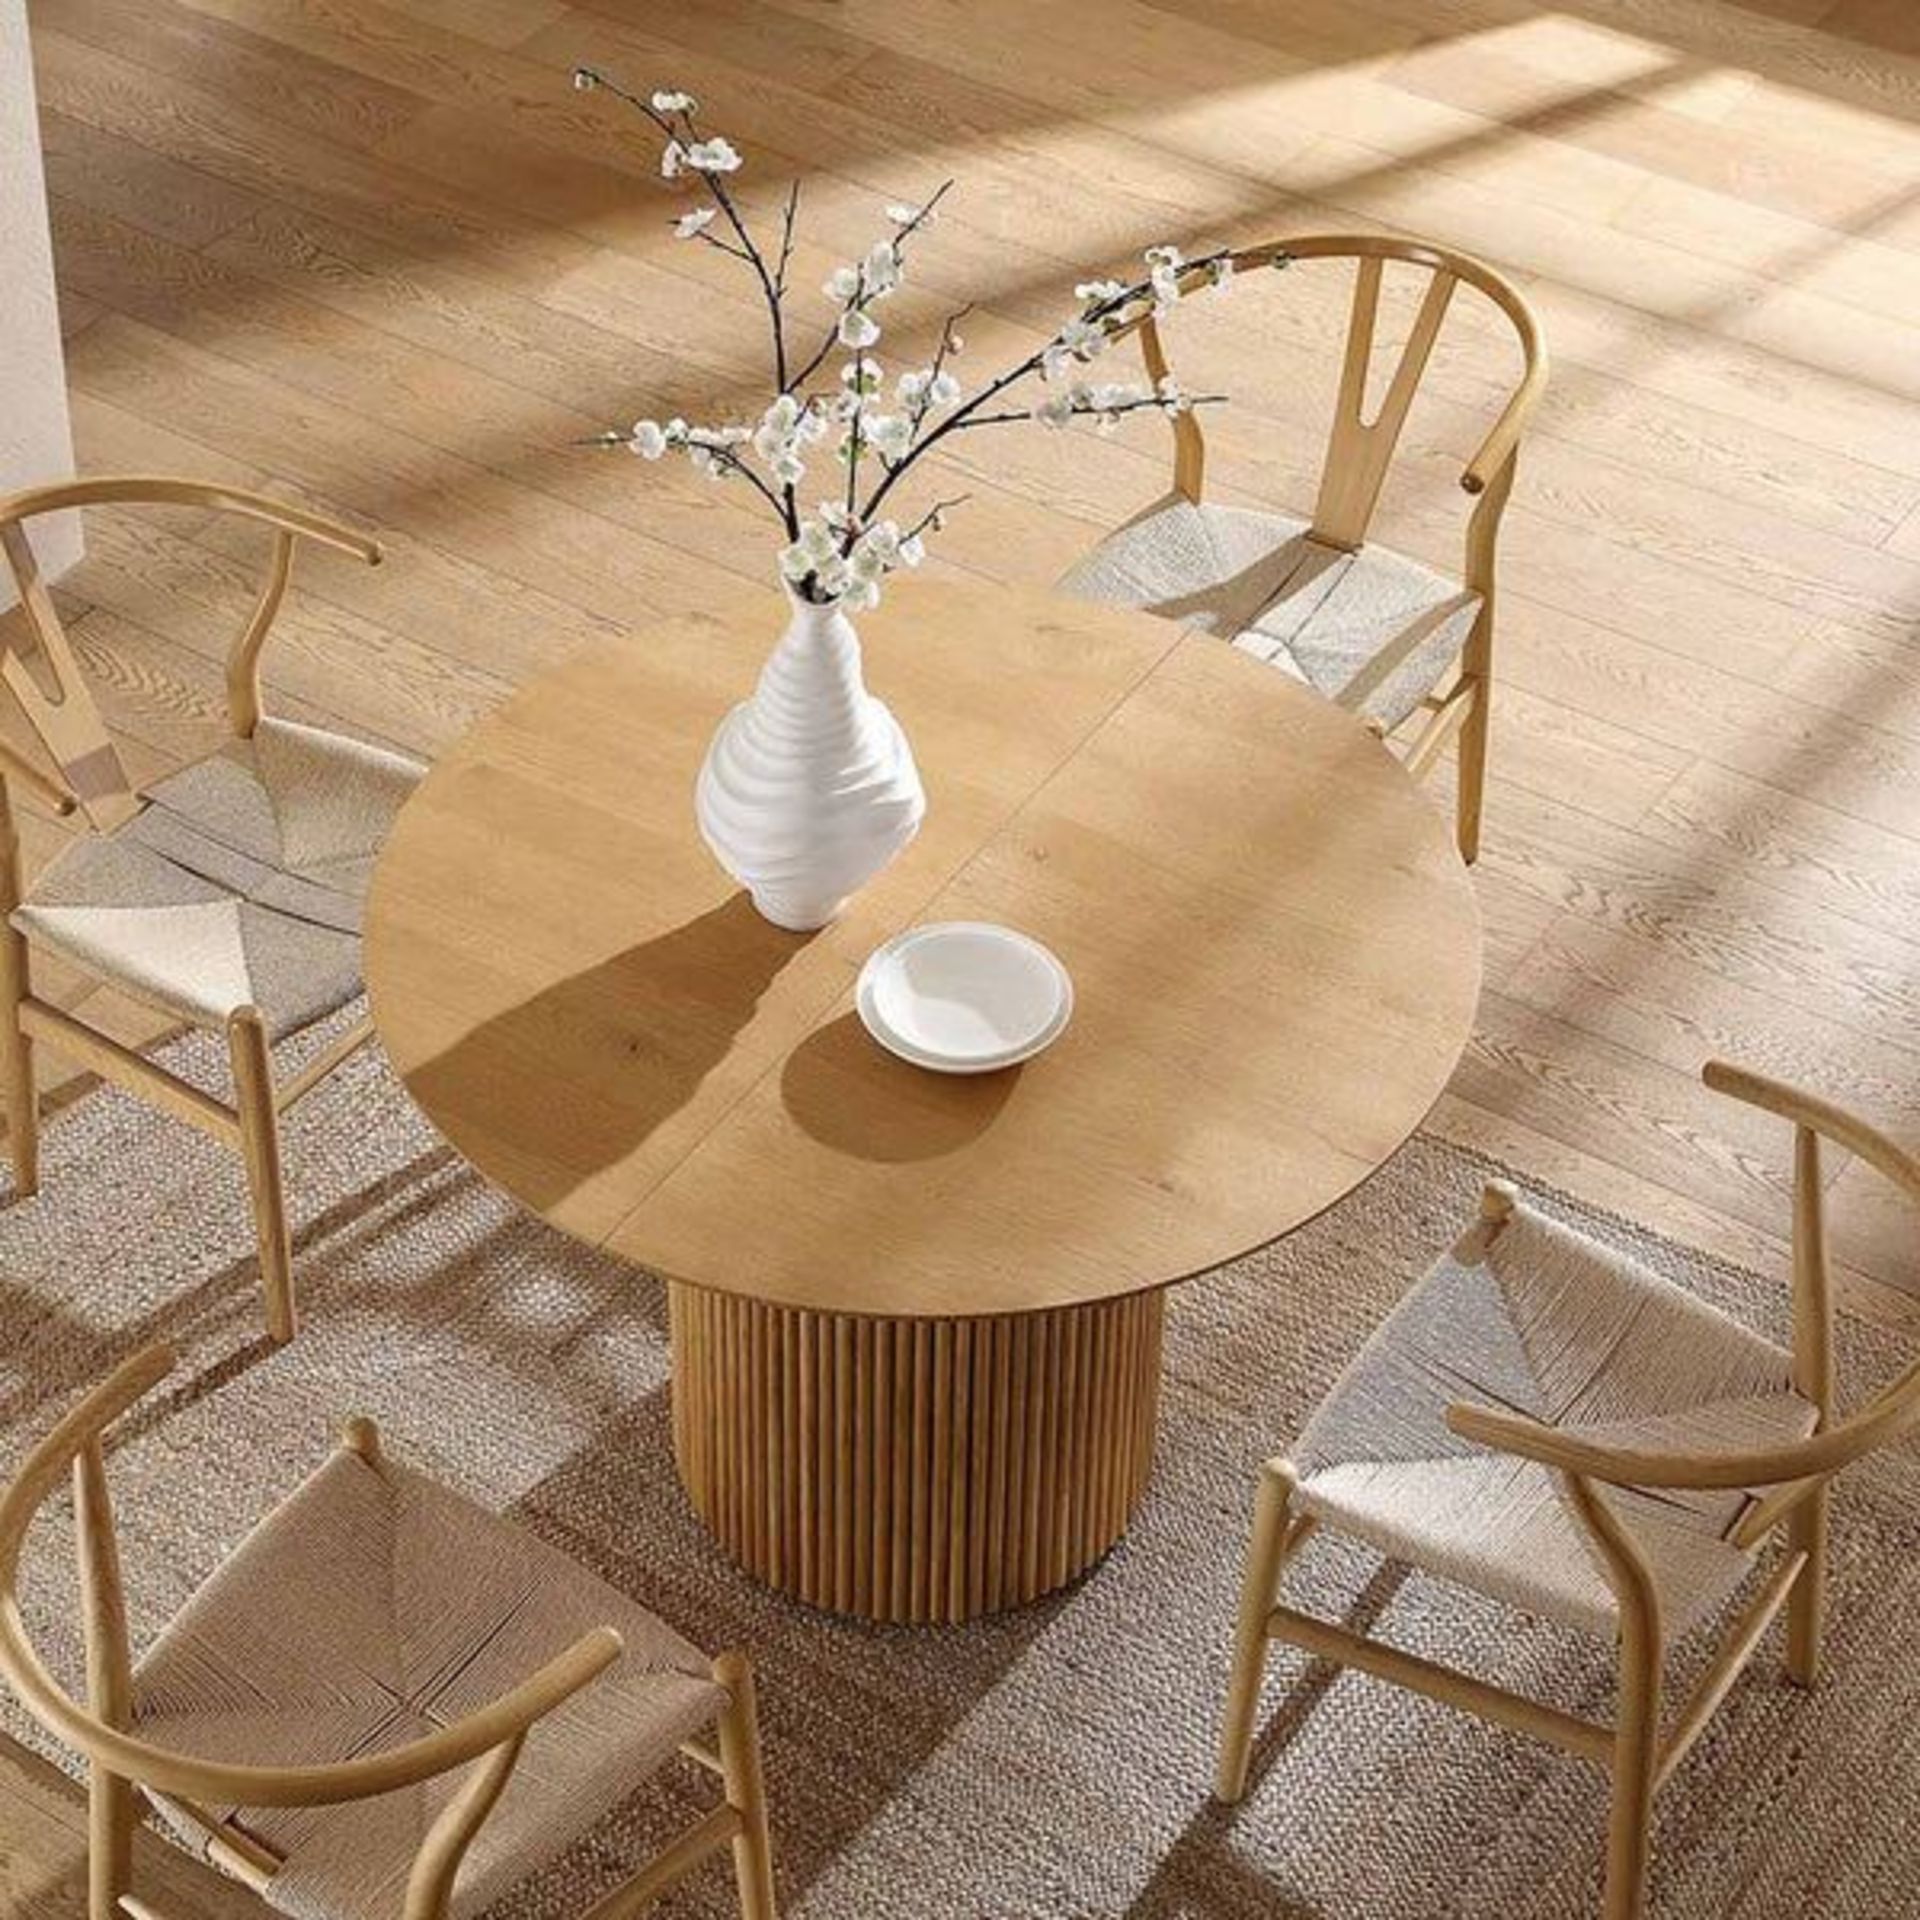 Maru Round 4-6 Seater Extending Oak Pedestal Dining Table, Oak. - R19.4. RRP £529.99. Our Maru - Image 2 of 2